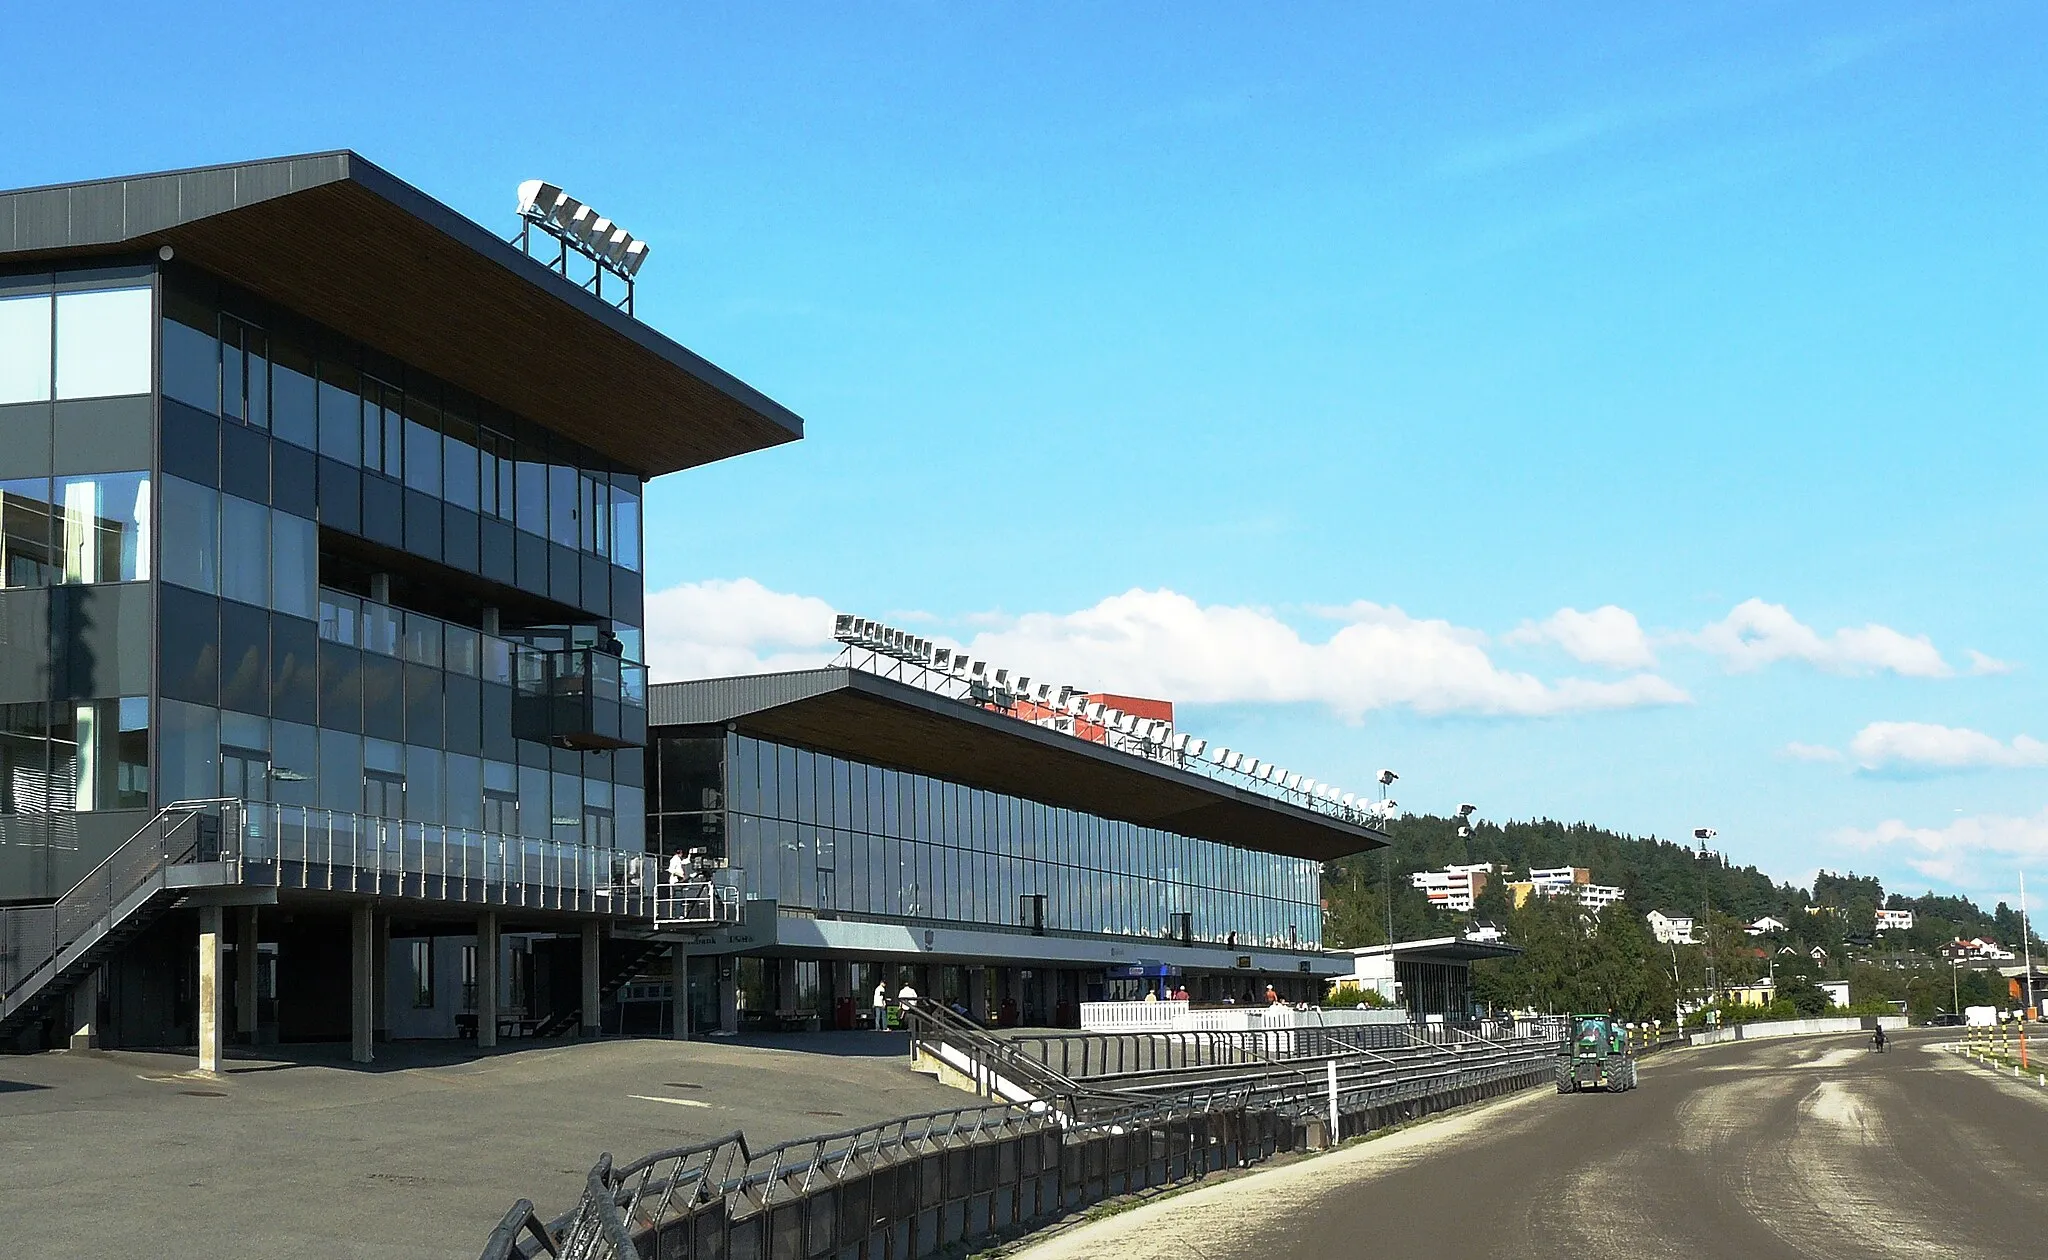 Photo showing: Bjerke Travbane / trot racing arena in Oslo, the main arena building with the track